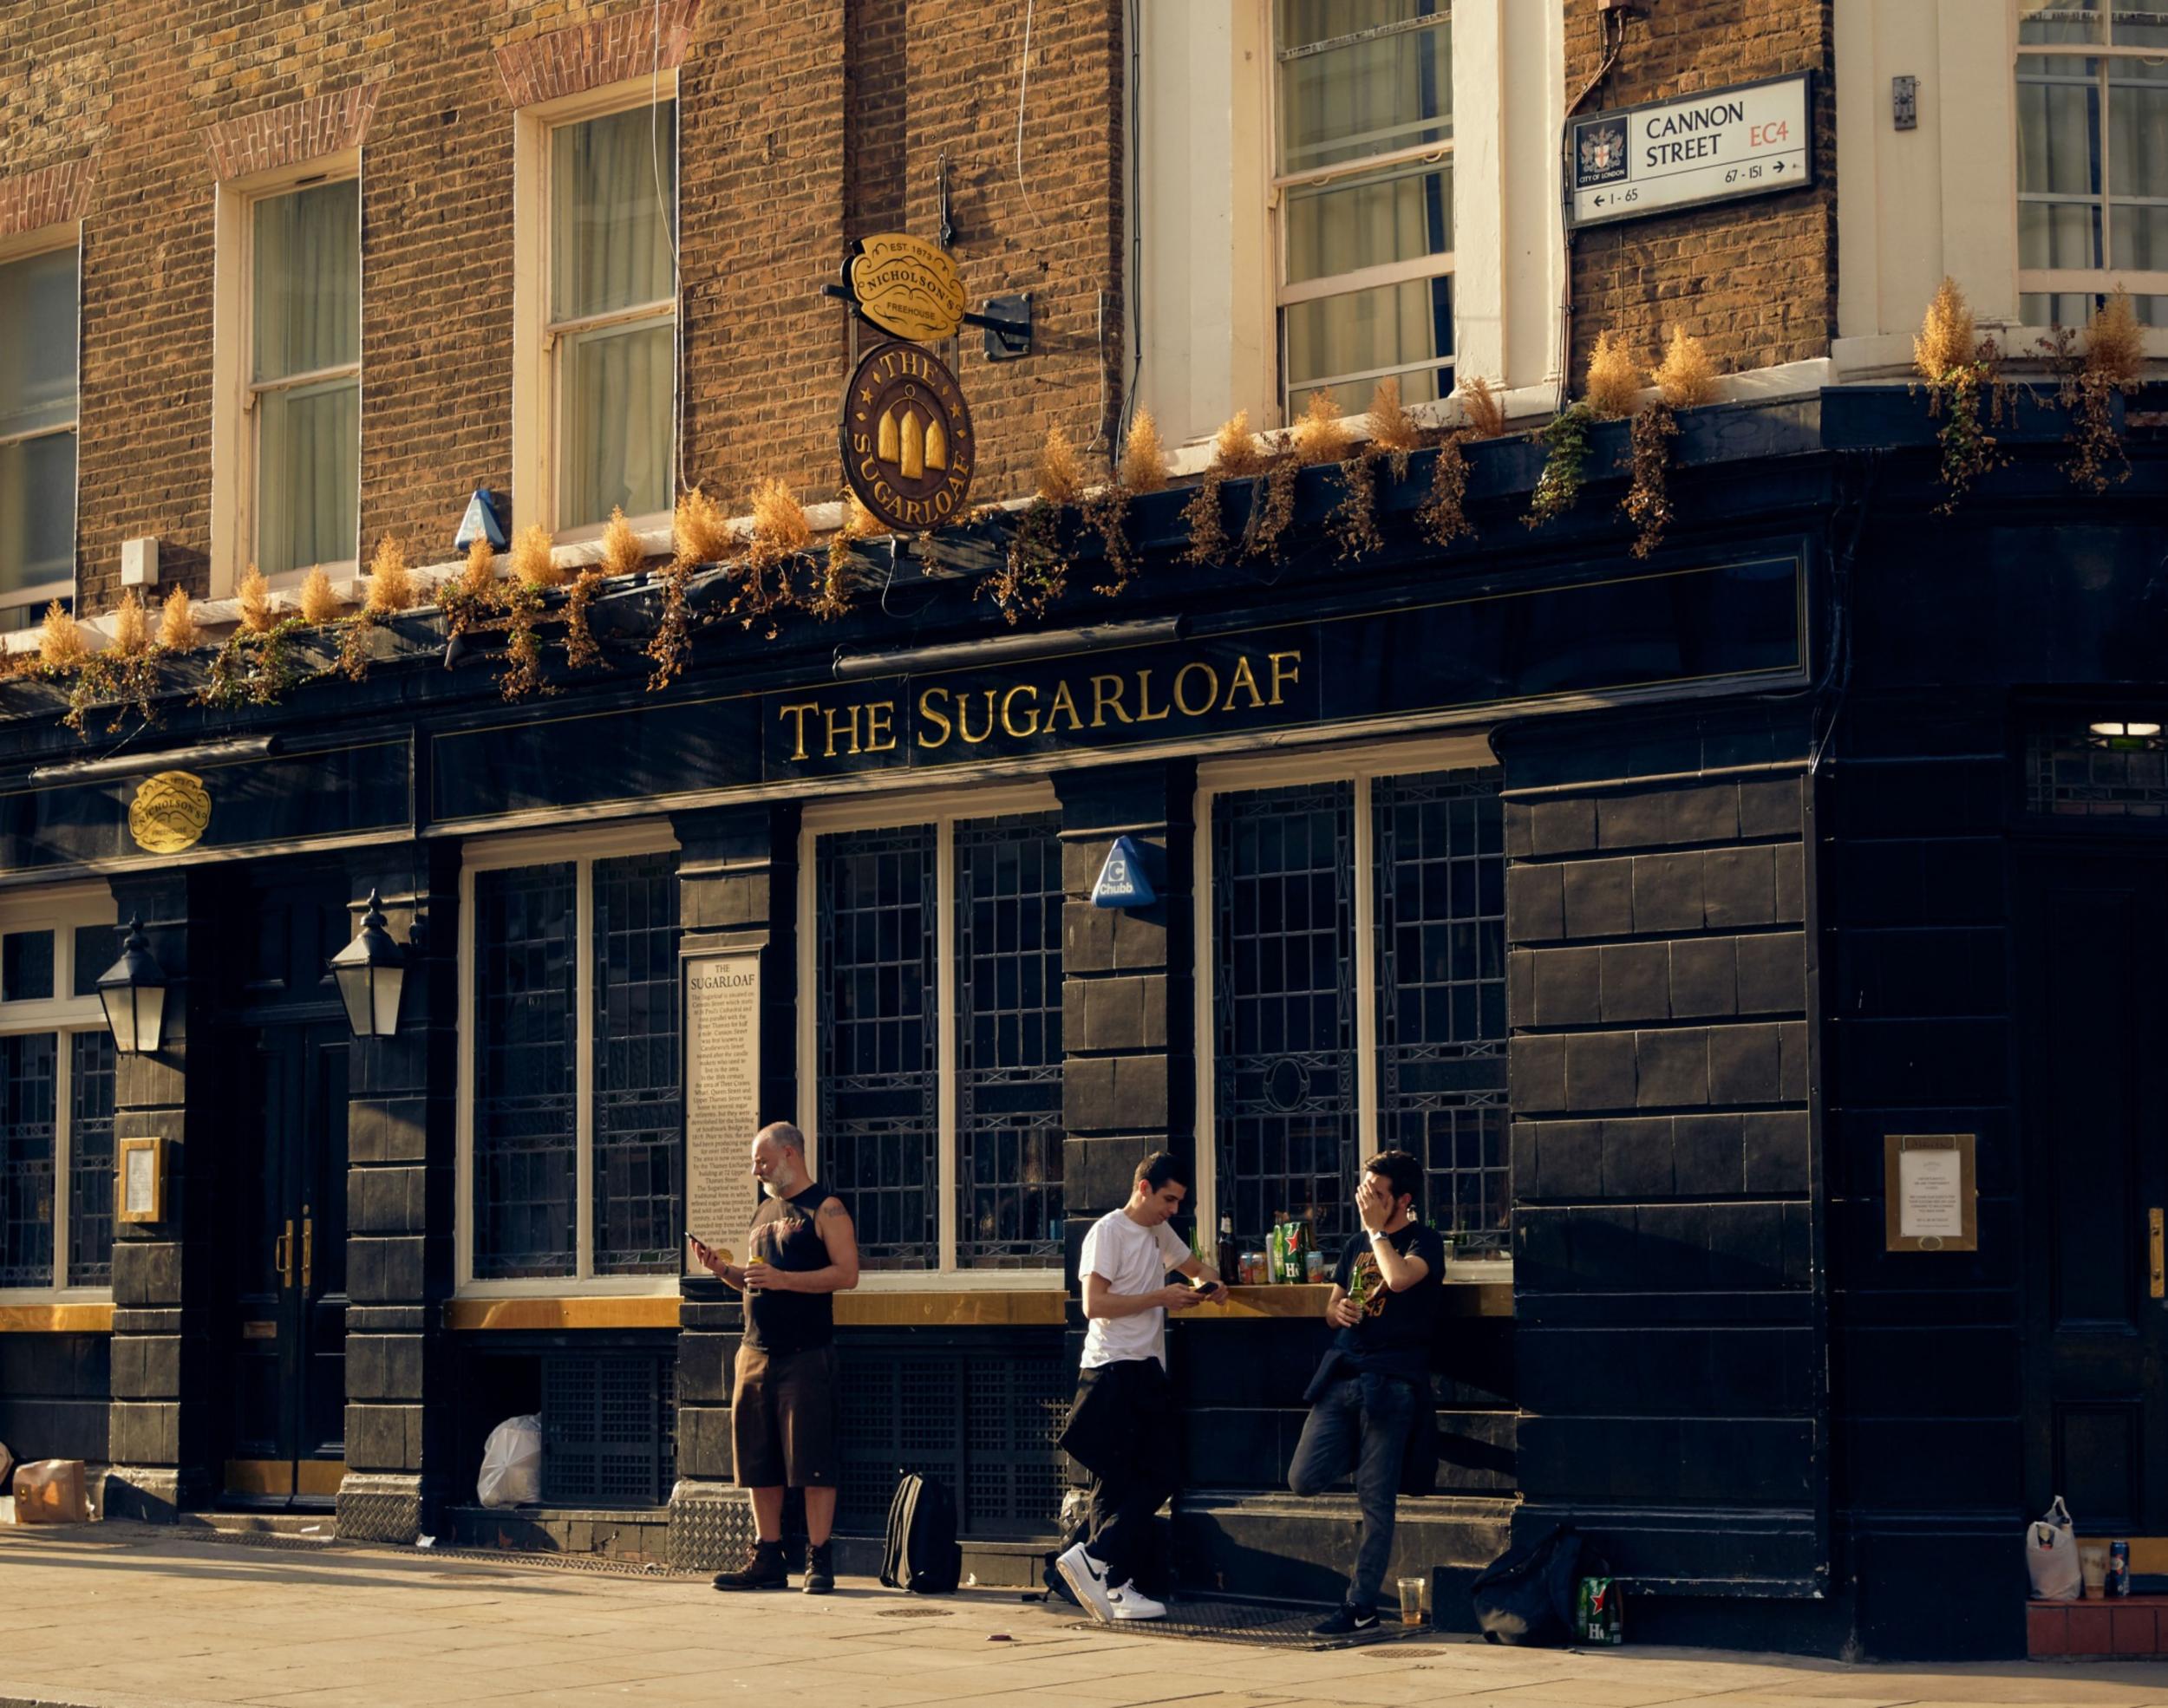 The Sugarloaf pub sits on Cannon Street in the City of London